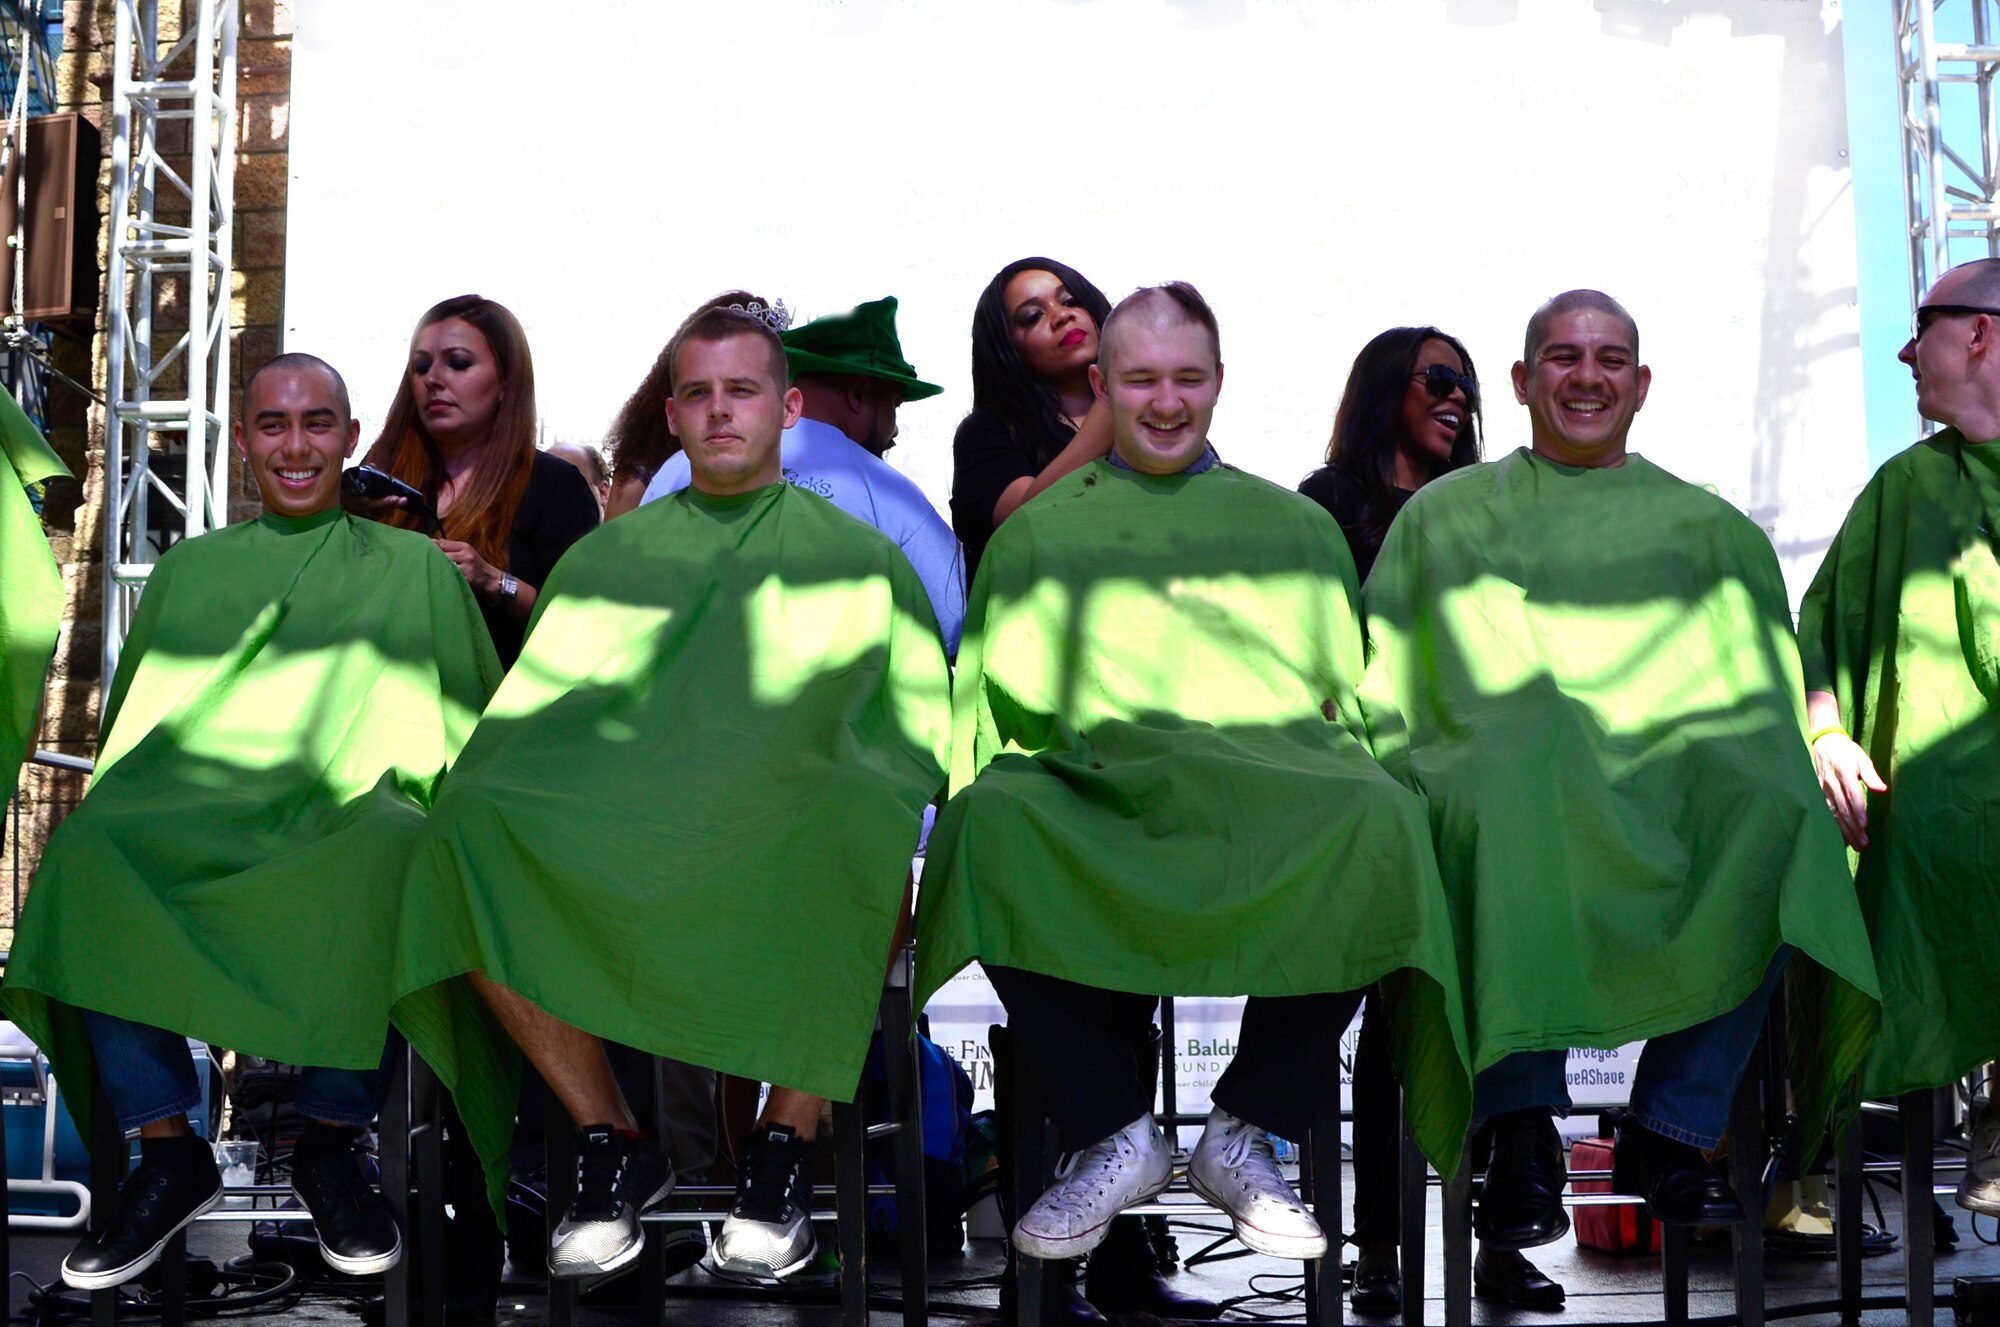 Members of the 15th Attack Squadron get their heads shaved for a fundraiser March 11, 2017, in Las Vegas. The members shaved their heads to show support to children who have been diagnosed with cancer. (U.S. Air Force photo/Senior Airman Christian Clausen)